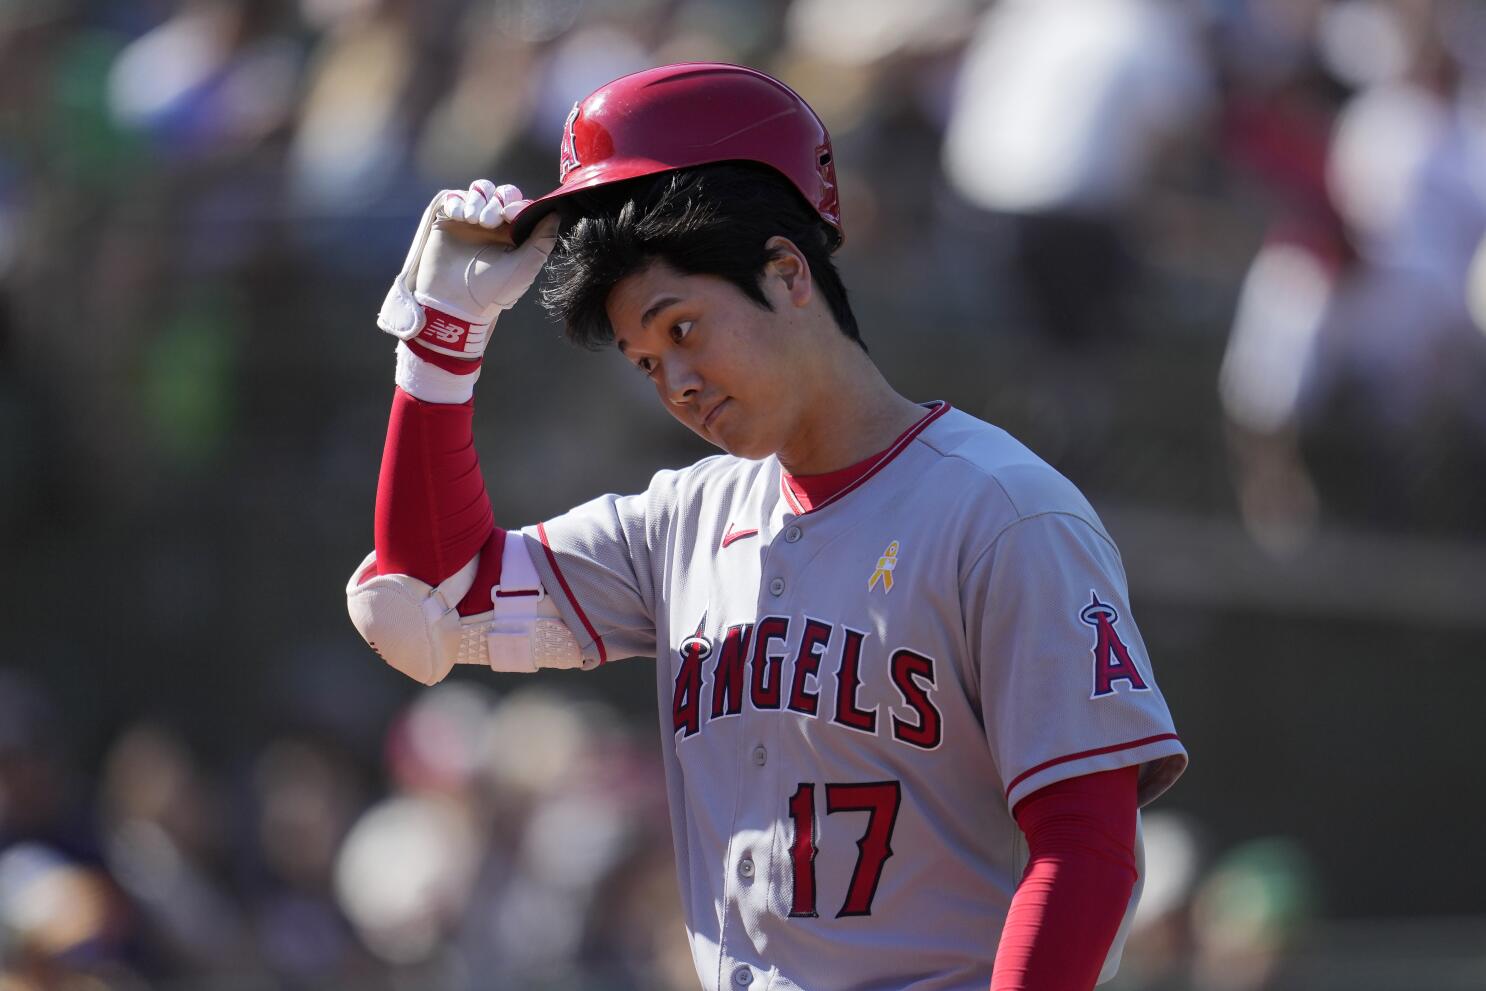 Angels season preview: Can deeper lineup correct offensive issues